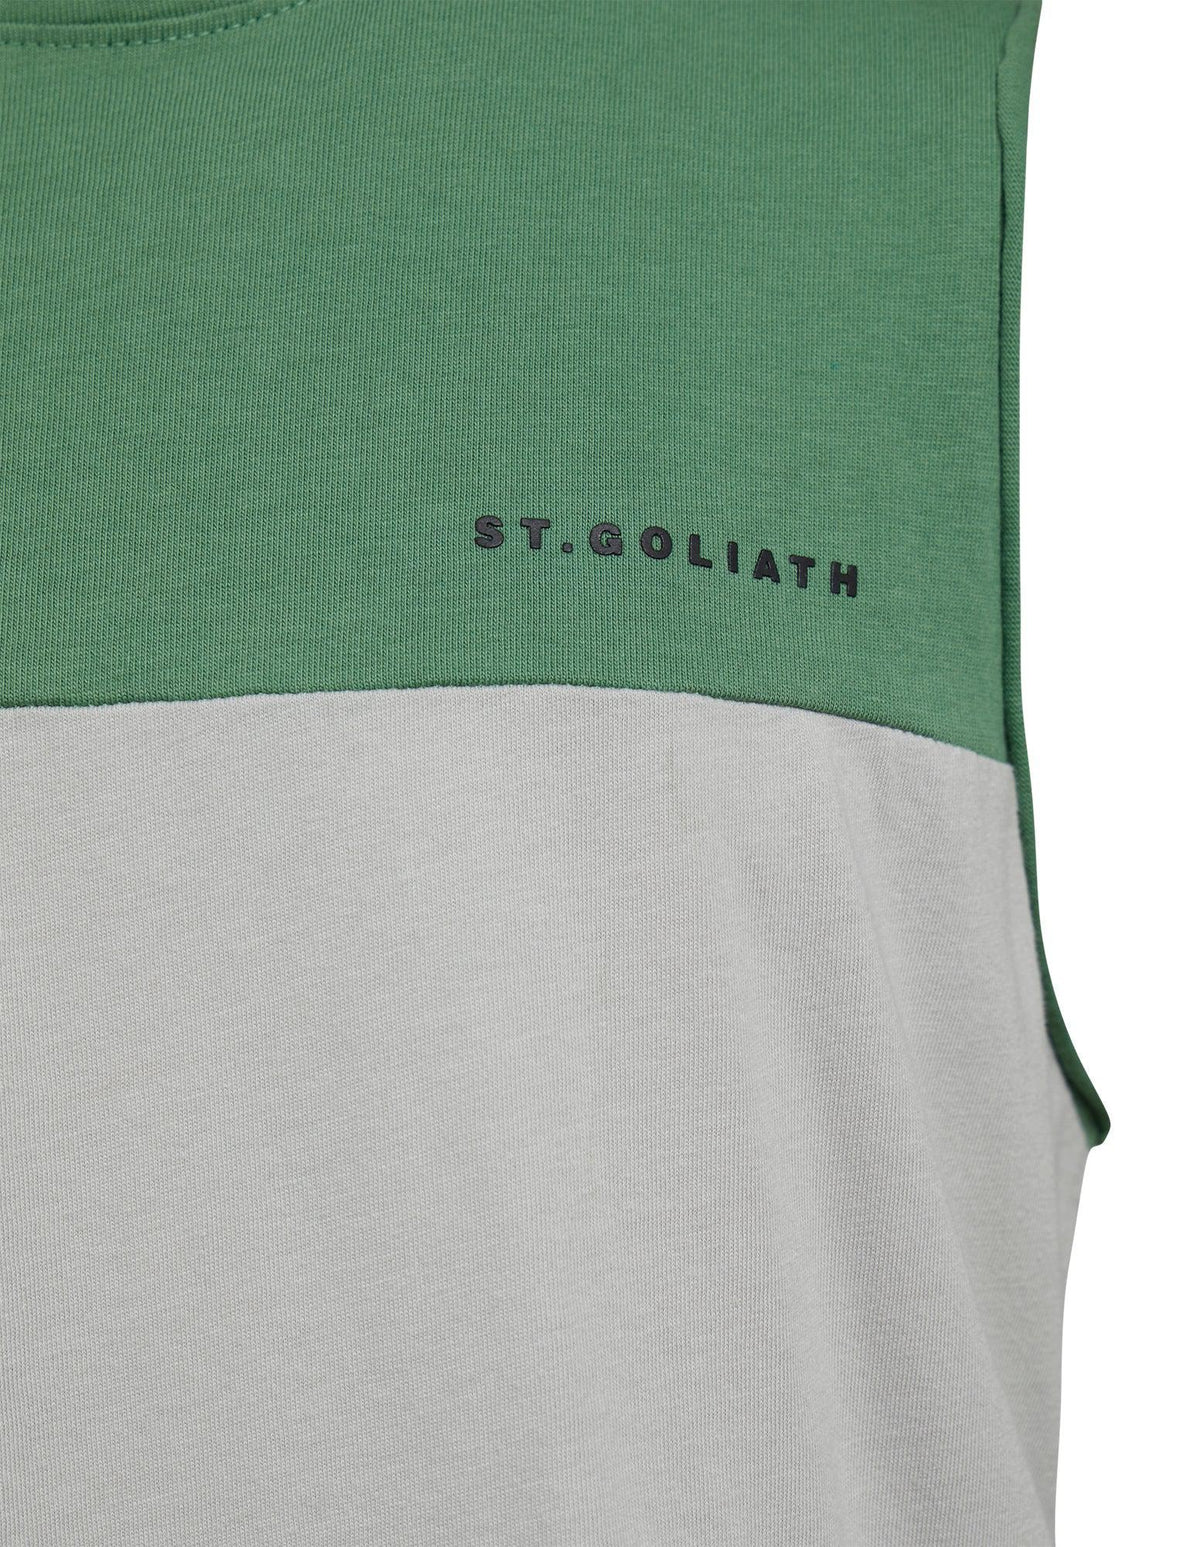 St Goliath 8-16-Kids Colour Block Muscle Green-Edge Clothing